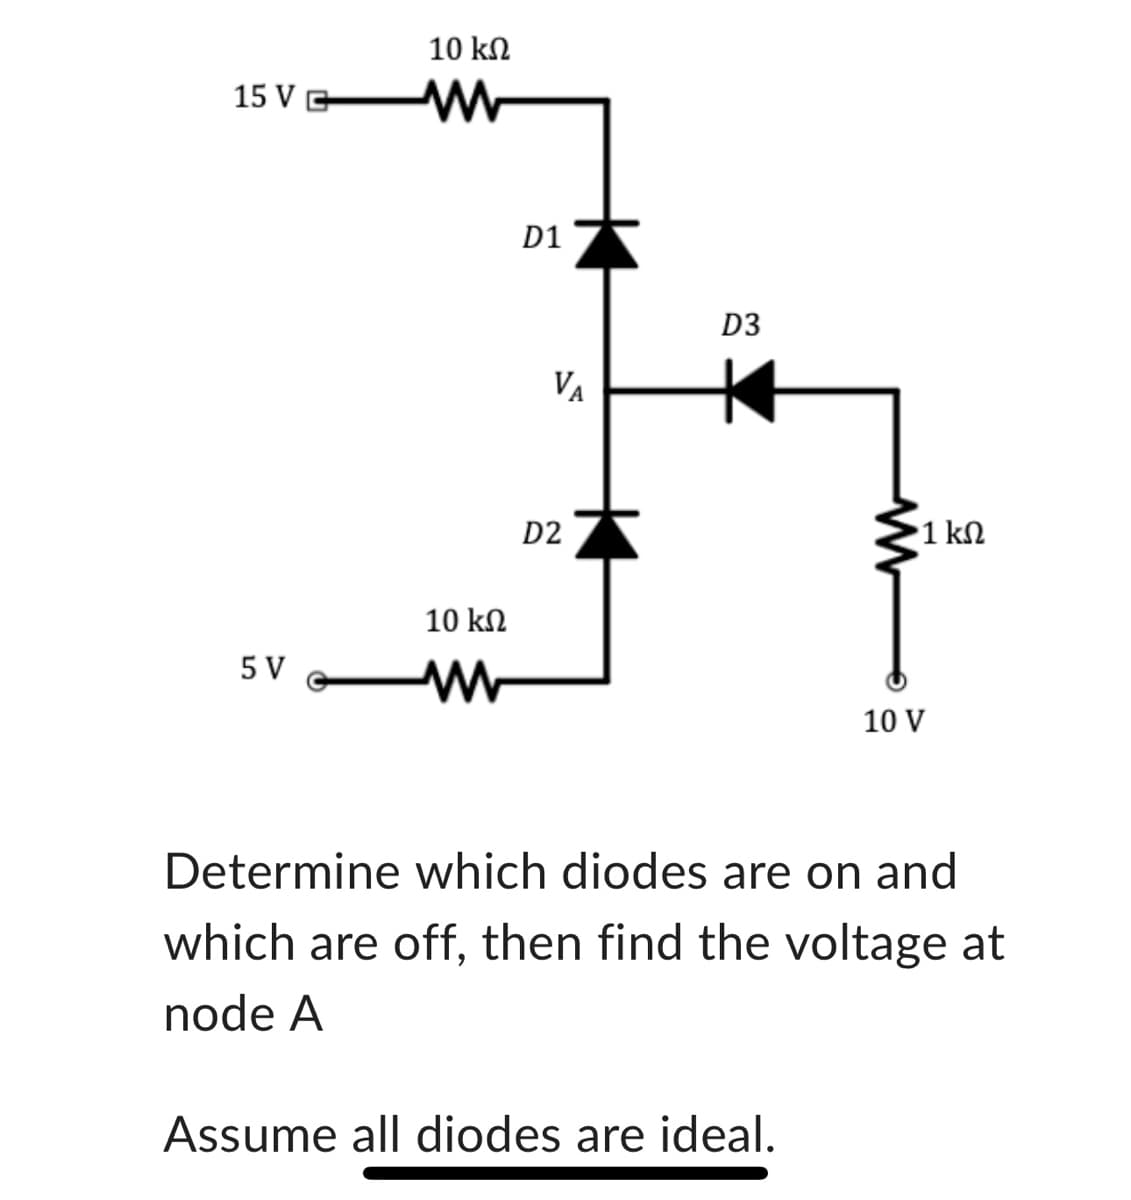 15 VG
5 V
10 ΚΩ
W
10 ΚΩ
W
D1
VA
D2
D3
•1 ΚΩ
Assume all diodes are ideal.
10 V
Determine which diodes are on and
which are off, then find the voltage at
node A